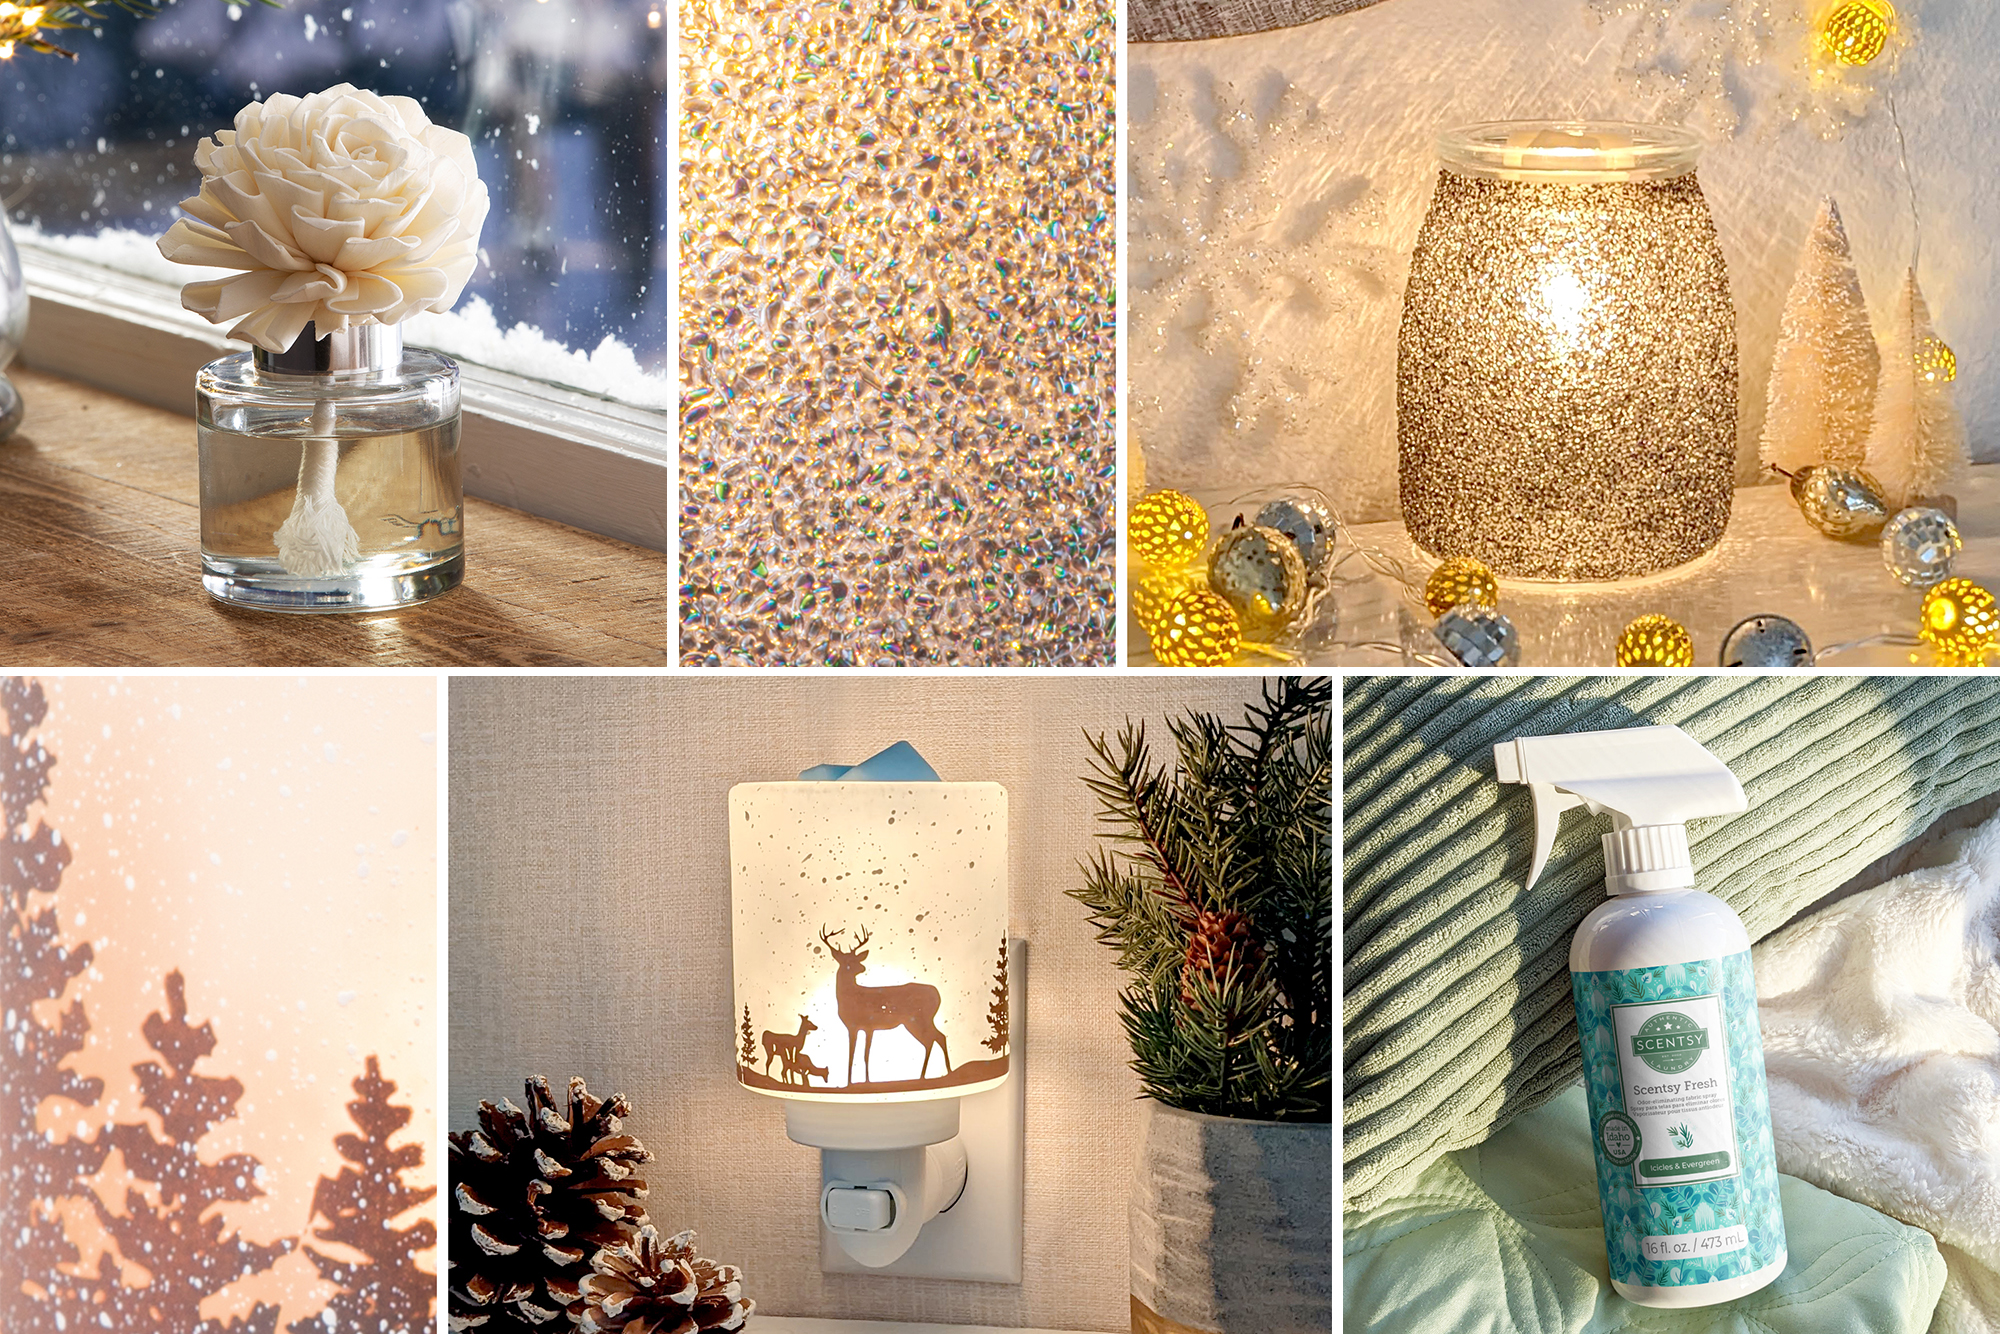 Expert tips for winter décor that outlasts the holidays